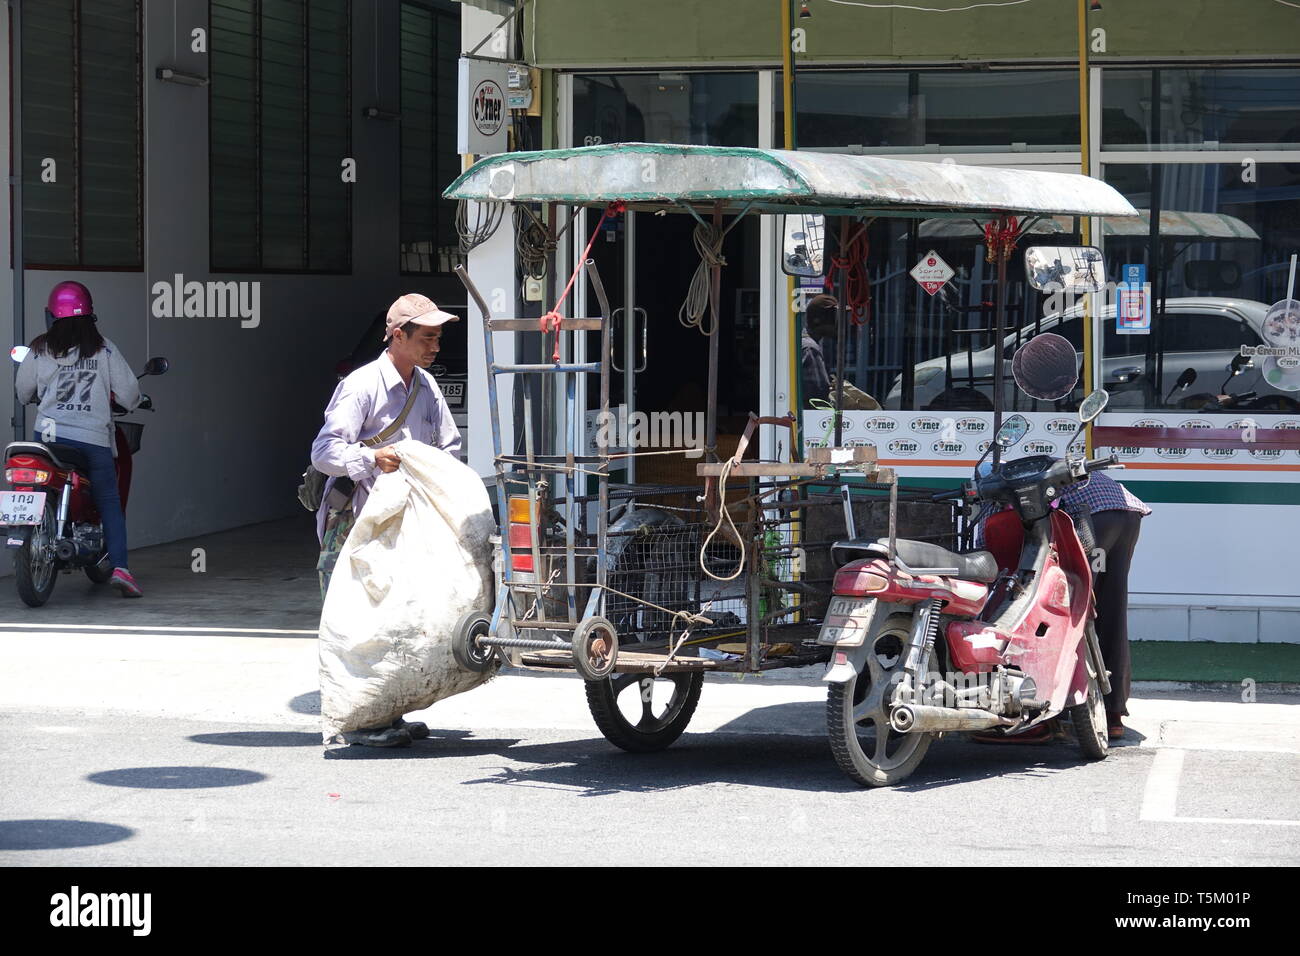 Phuket Stadt, Thailand. 28th Feb, 2019. A man drags a sack to his moped sidecar. Credit: Alexandra Schuler/dpa/Alamy Live News Stock Photo